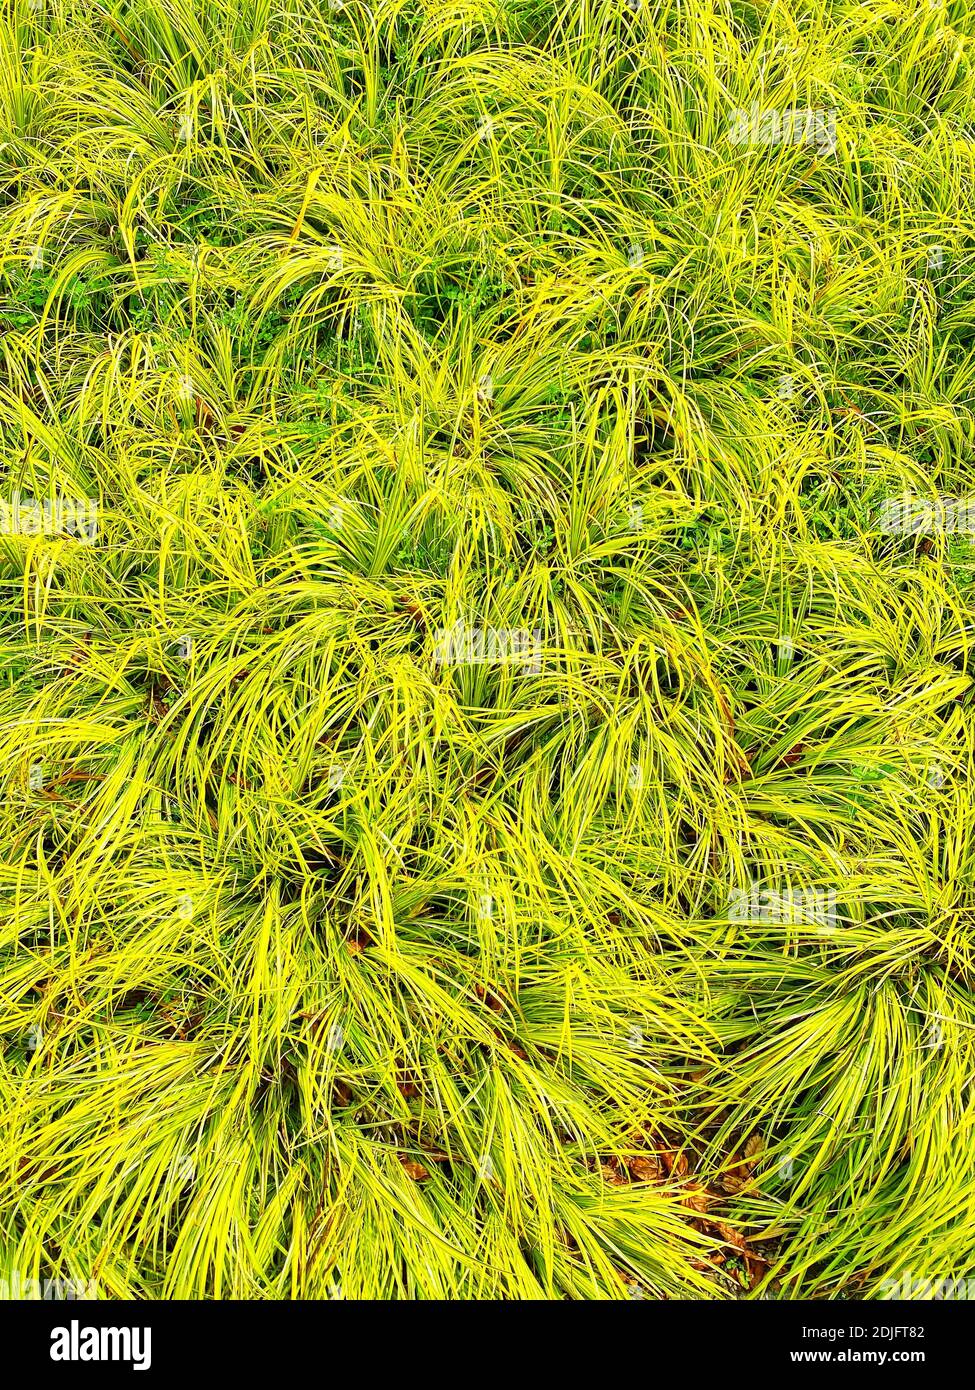 Long hardy grass. The botanical name is Acorus gramineus 'Ogon'. No people. Copy space. Background. Stock Photo